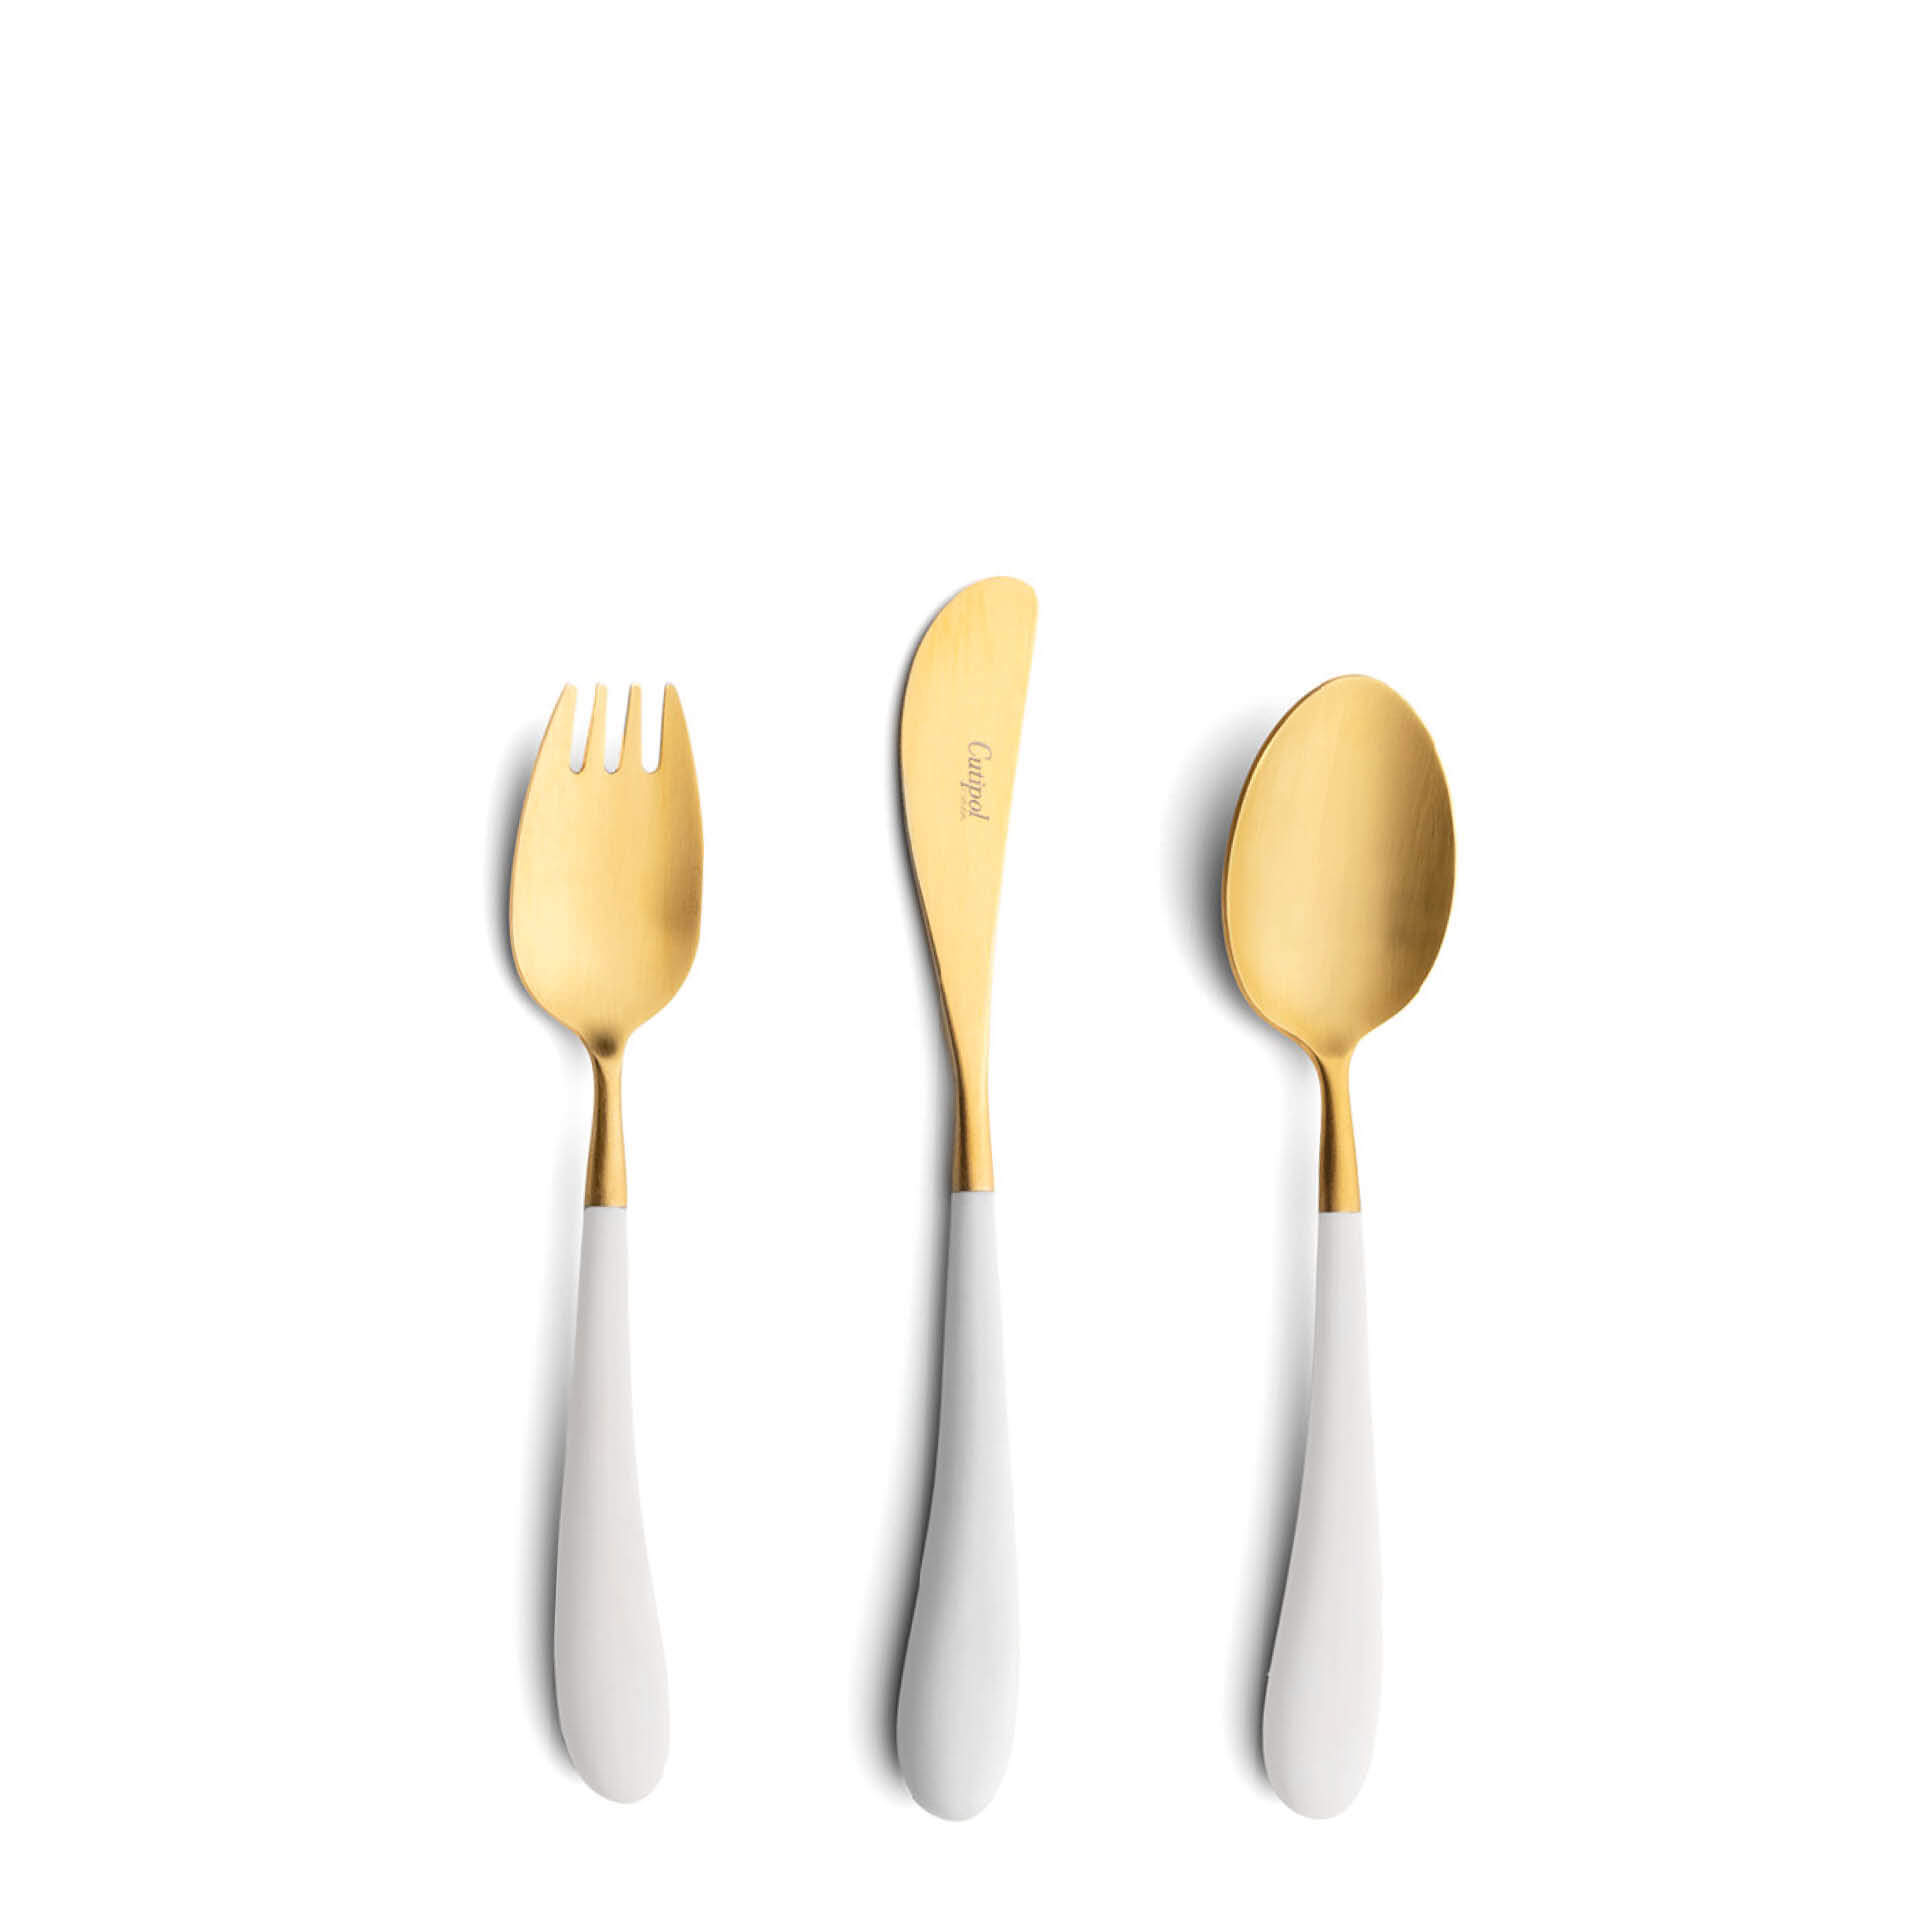 Cutipol Childrens Cutlery Alice White with dinner fork, dinner knife, table spoon with white handles and matte gold finish